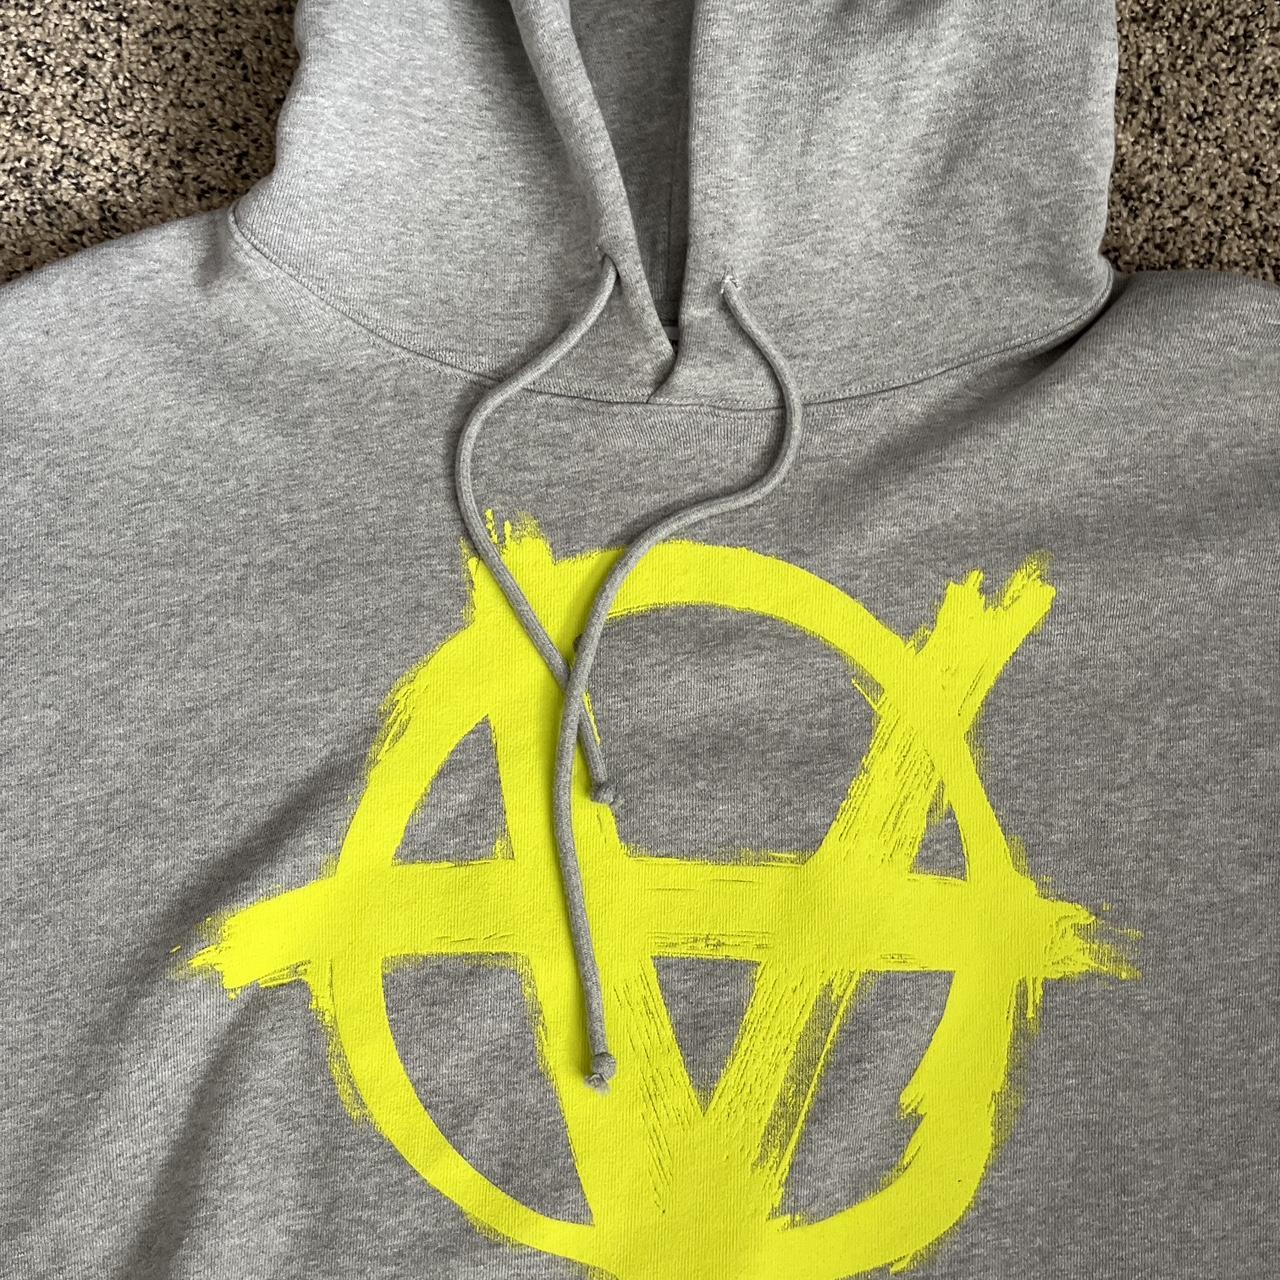 AnaVETEMENTS 20ss Anarchy Hoodie 983 値下げ！